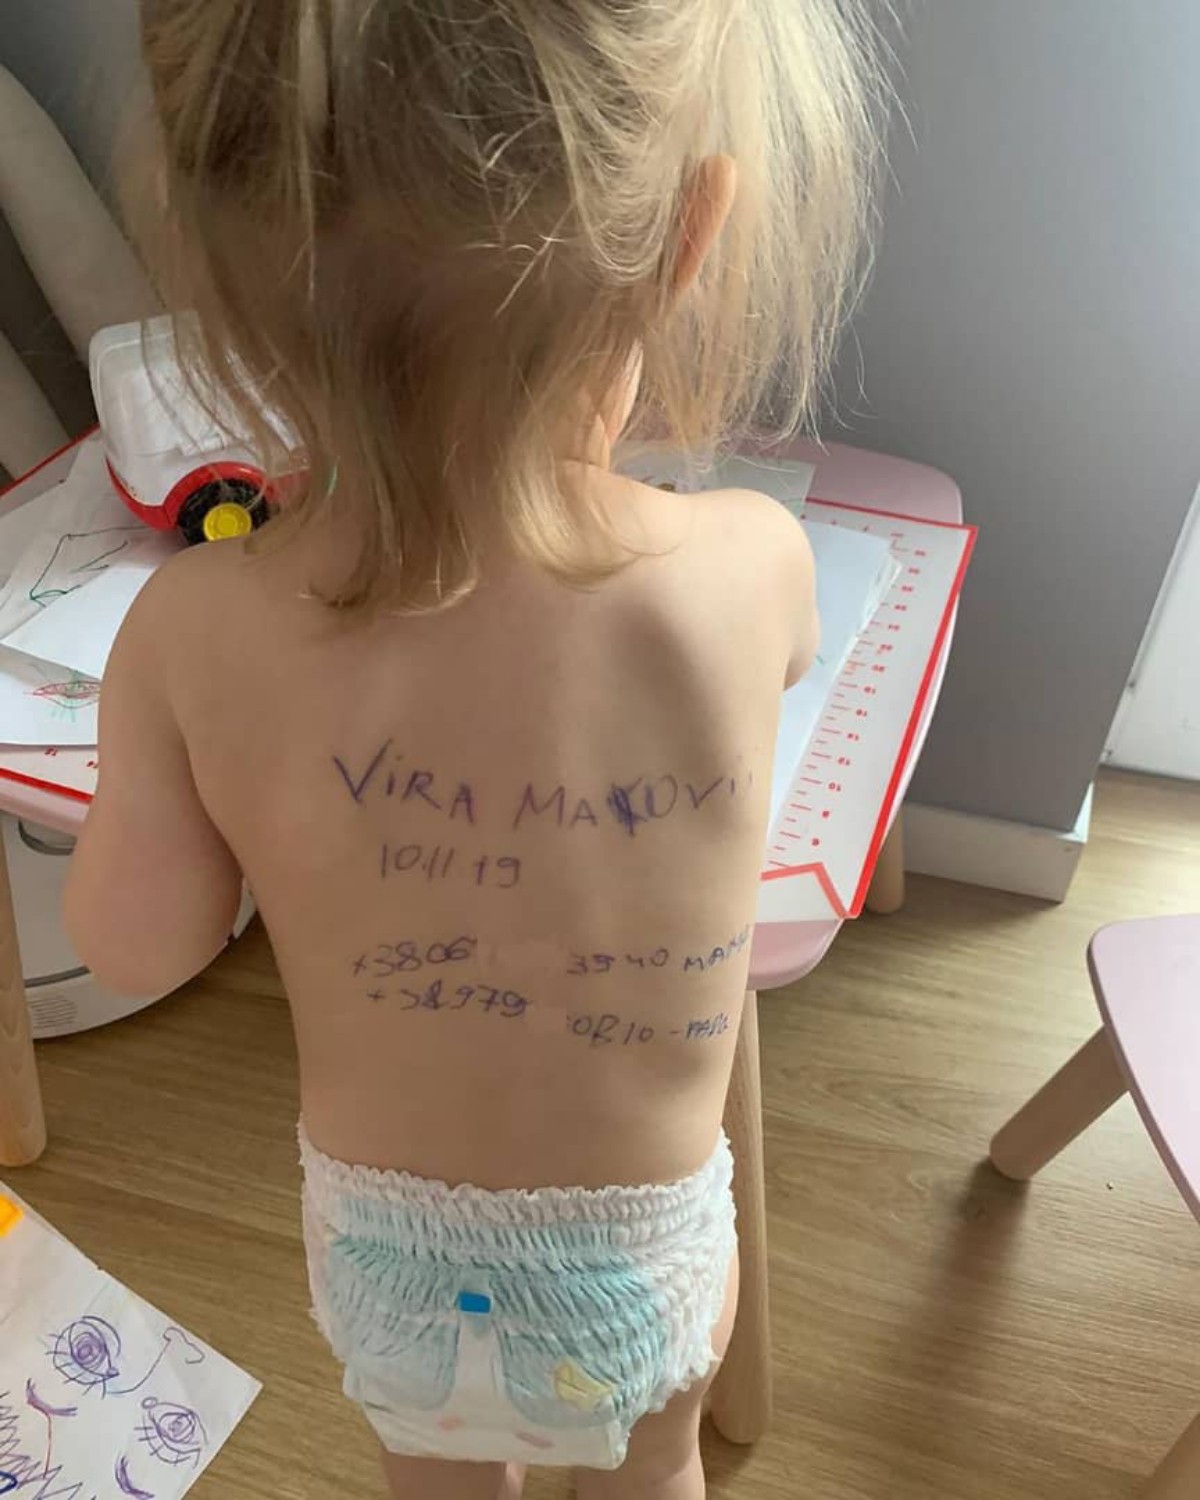 Ukraine Mother Writes Vital Information On Her Little Daughter's Back In Fears Of Being Killed (Photos).